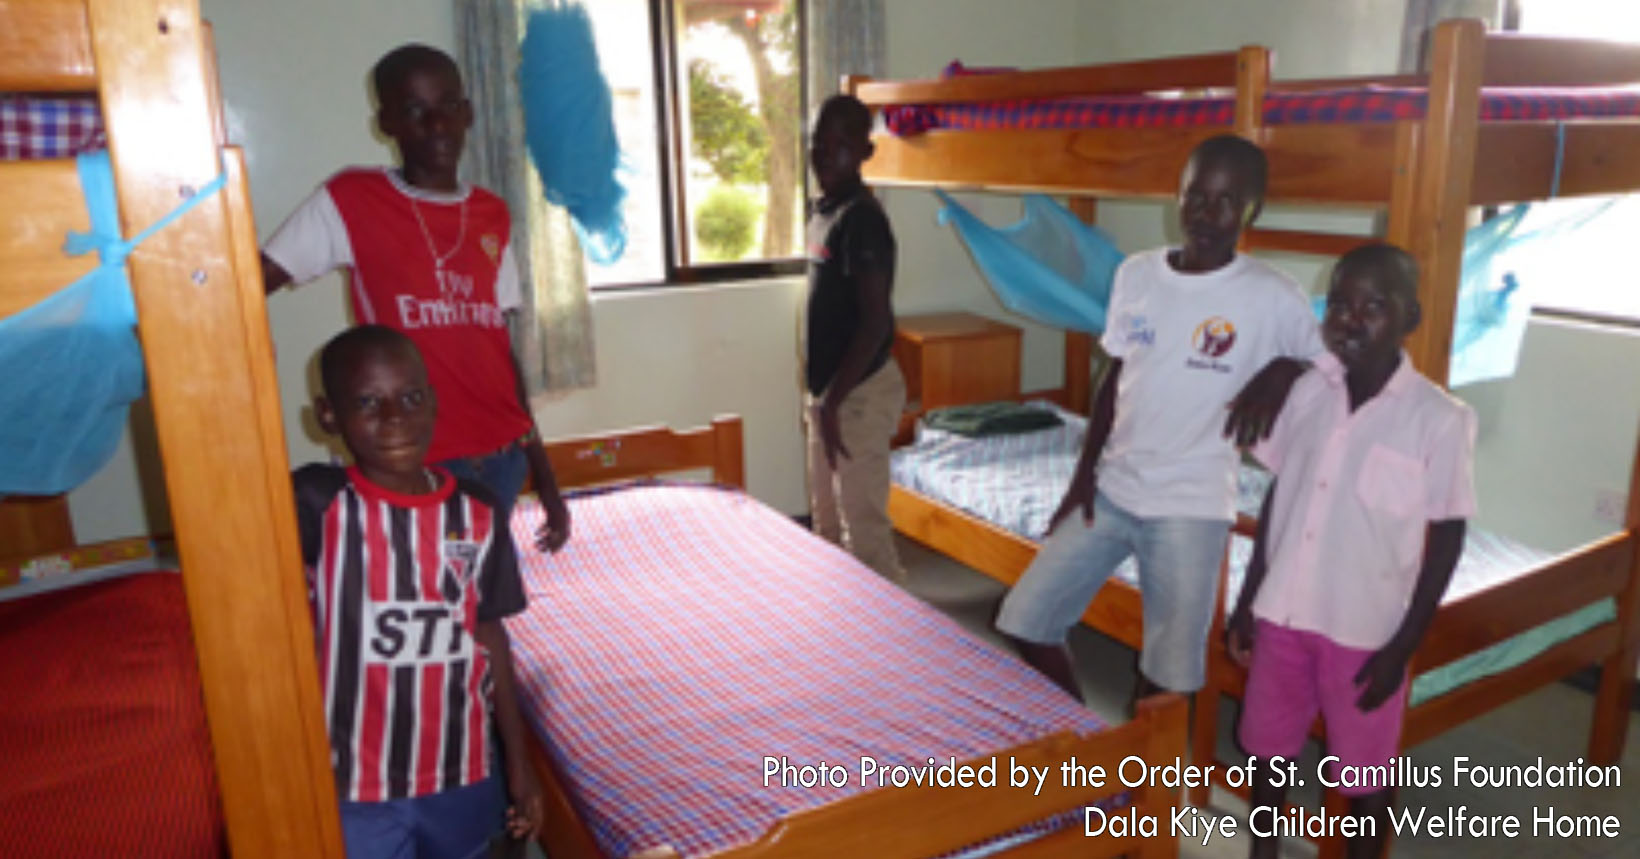 The young ladies here are a part of the project held by the Order of St. Camillus. Before beginning on any activities for the day, they must make sure that their beds are made. The young woman Lucy is almost finished tucking in her sheets to make her bed.